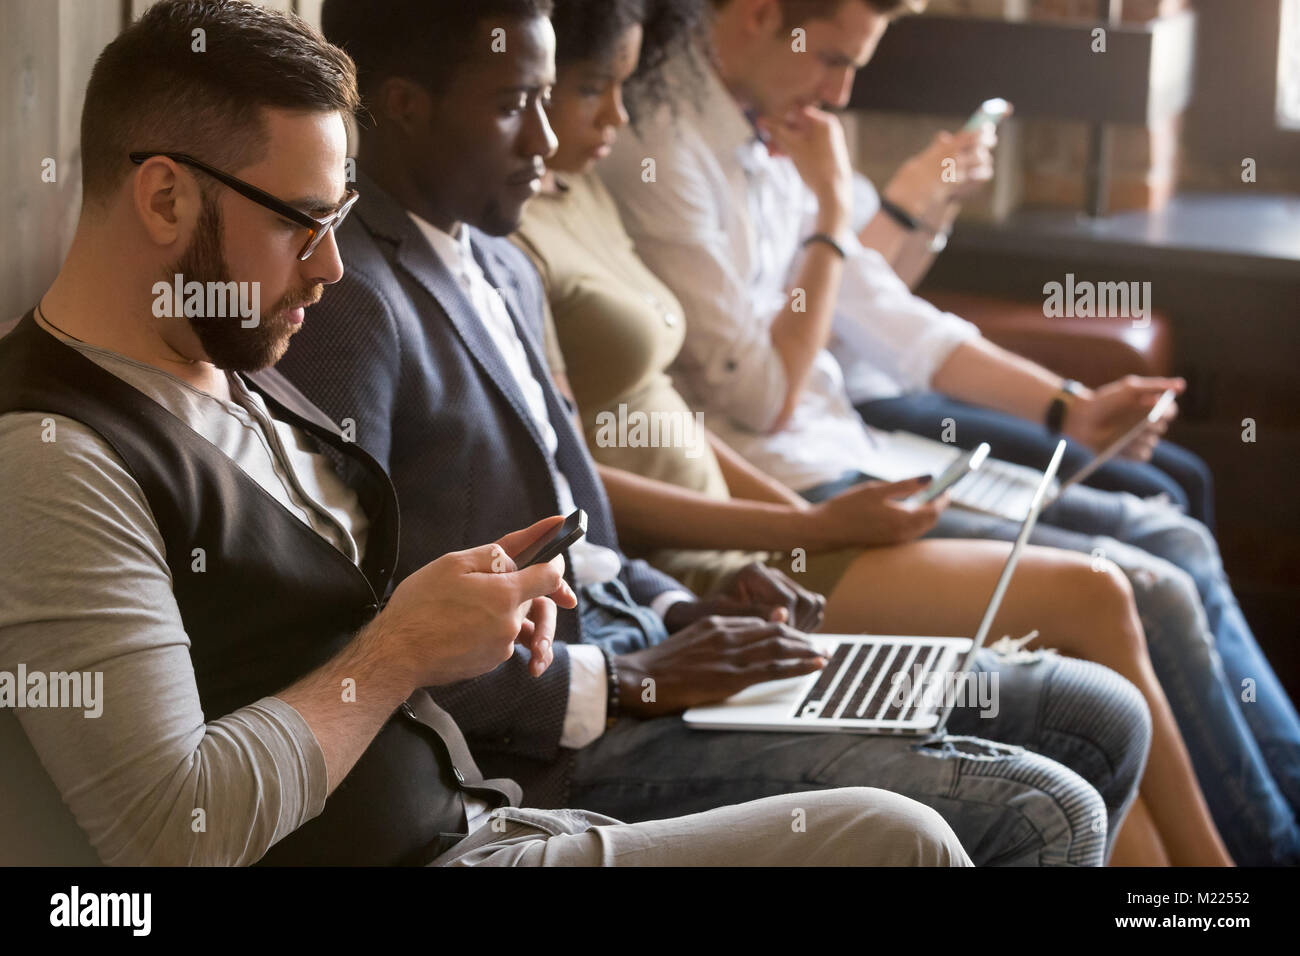 Multi ethnic group of young people using electronic devices indo Stock Photo